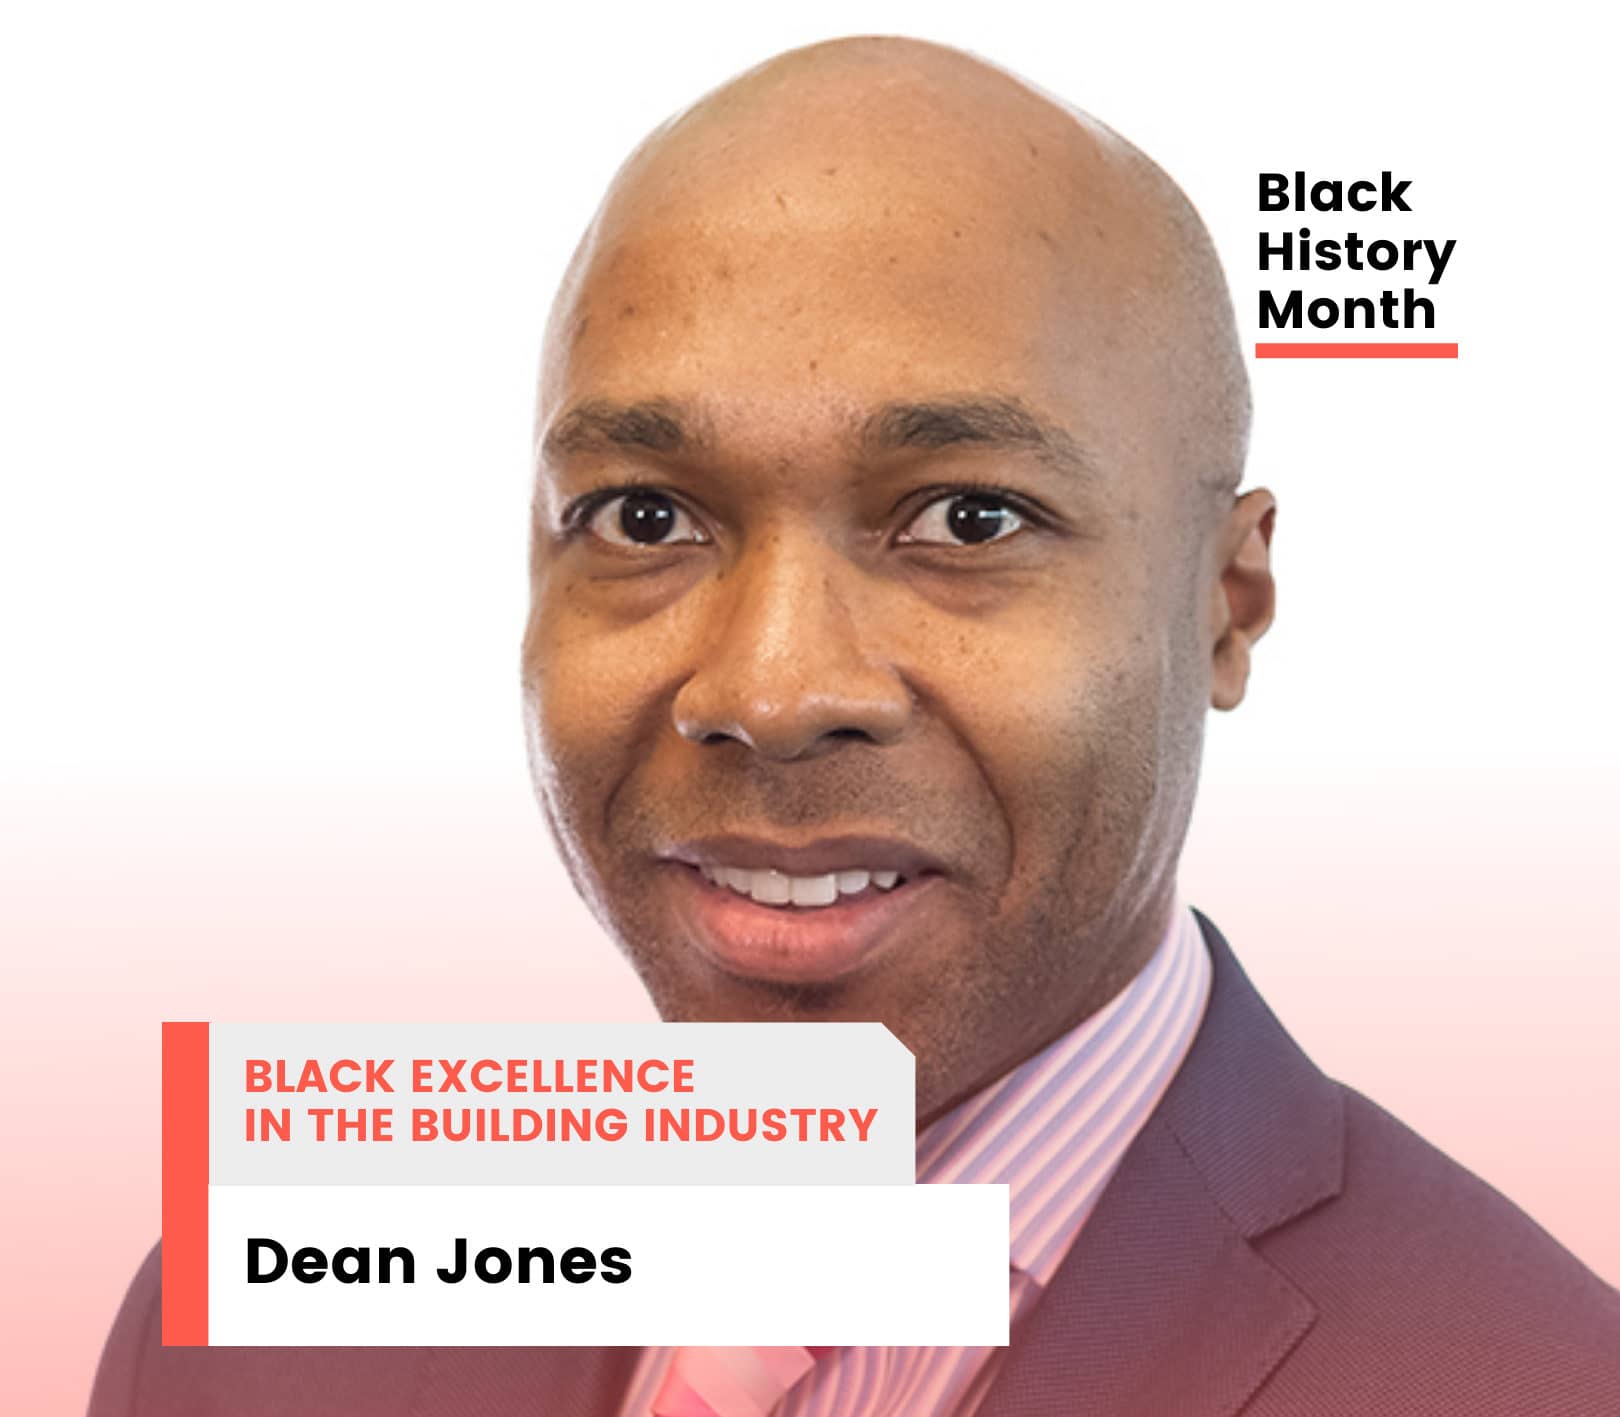 Black Excellence in the Building Industry names 8 leading figures